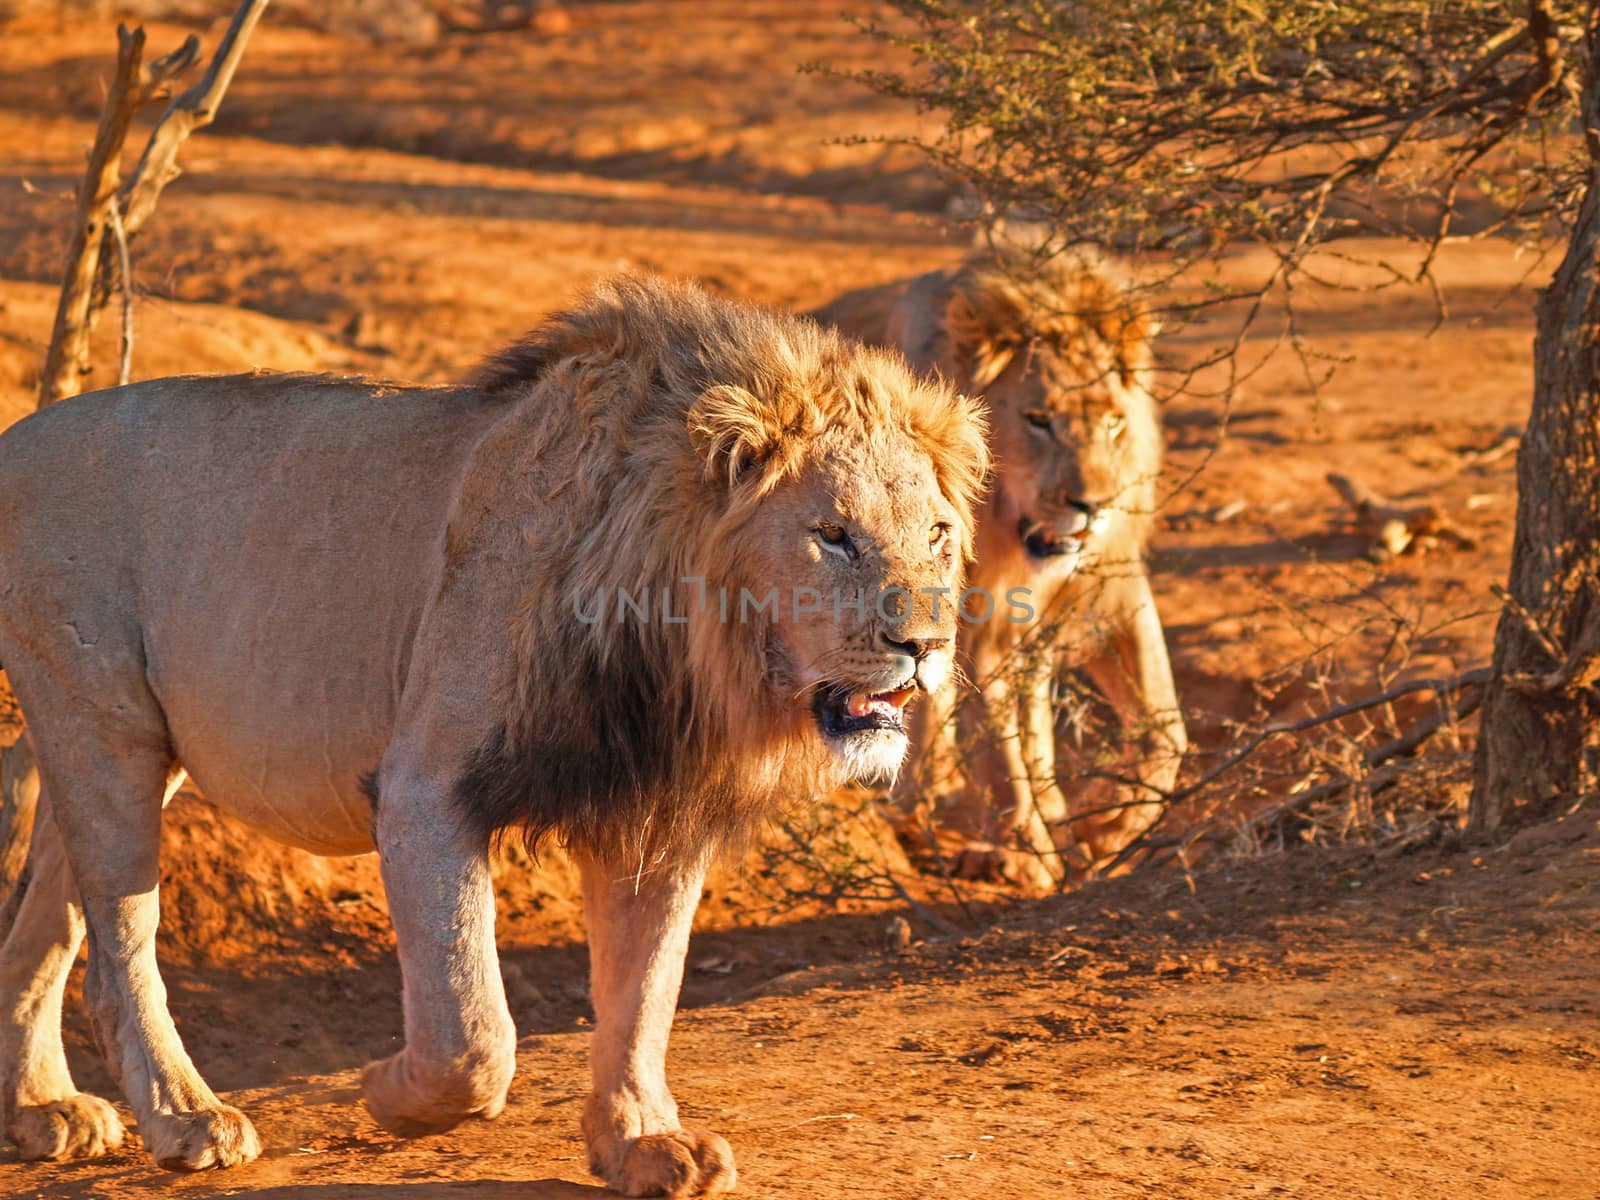 Two leisurely male lions walking together in heat of African day